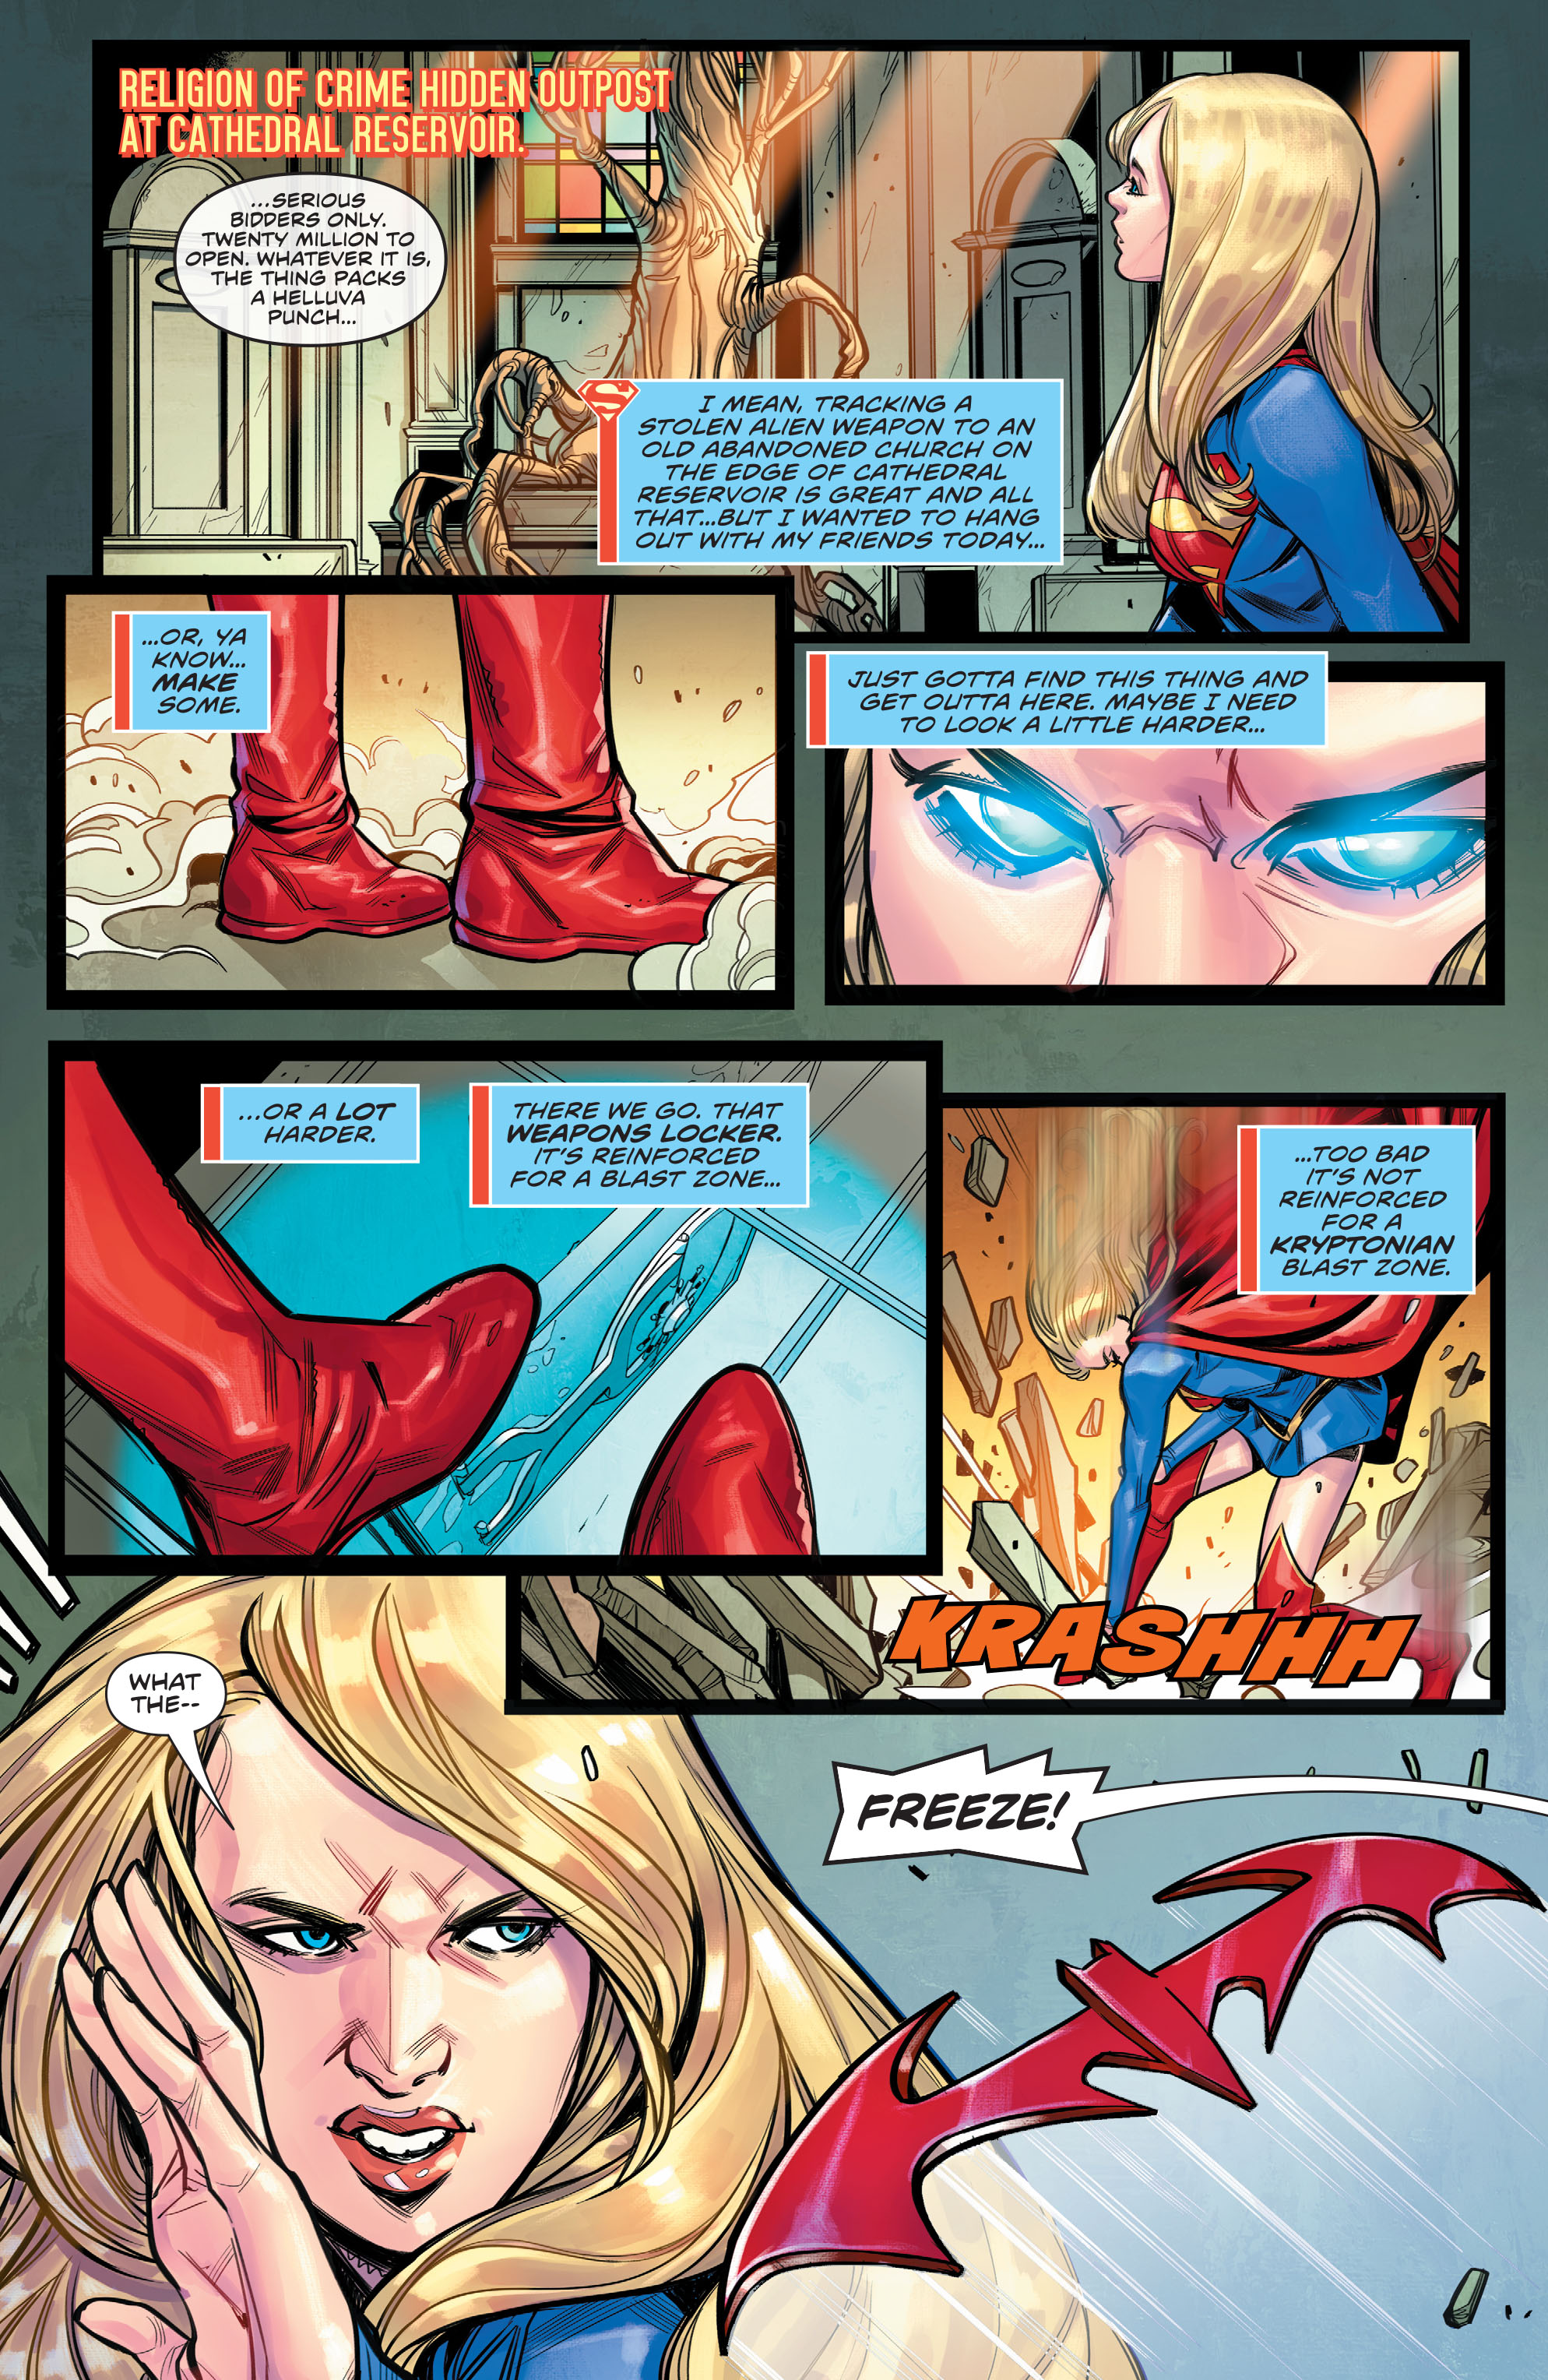 World's Finest: Batwoman and Supergirl (2020-): Chapter 1 - Page 3